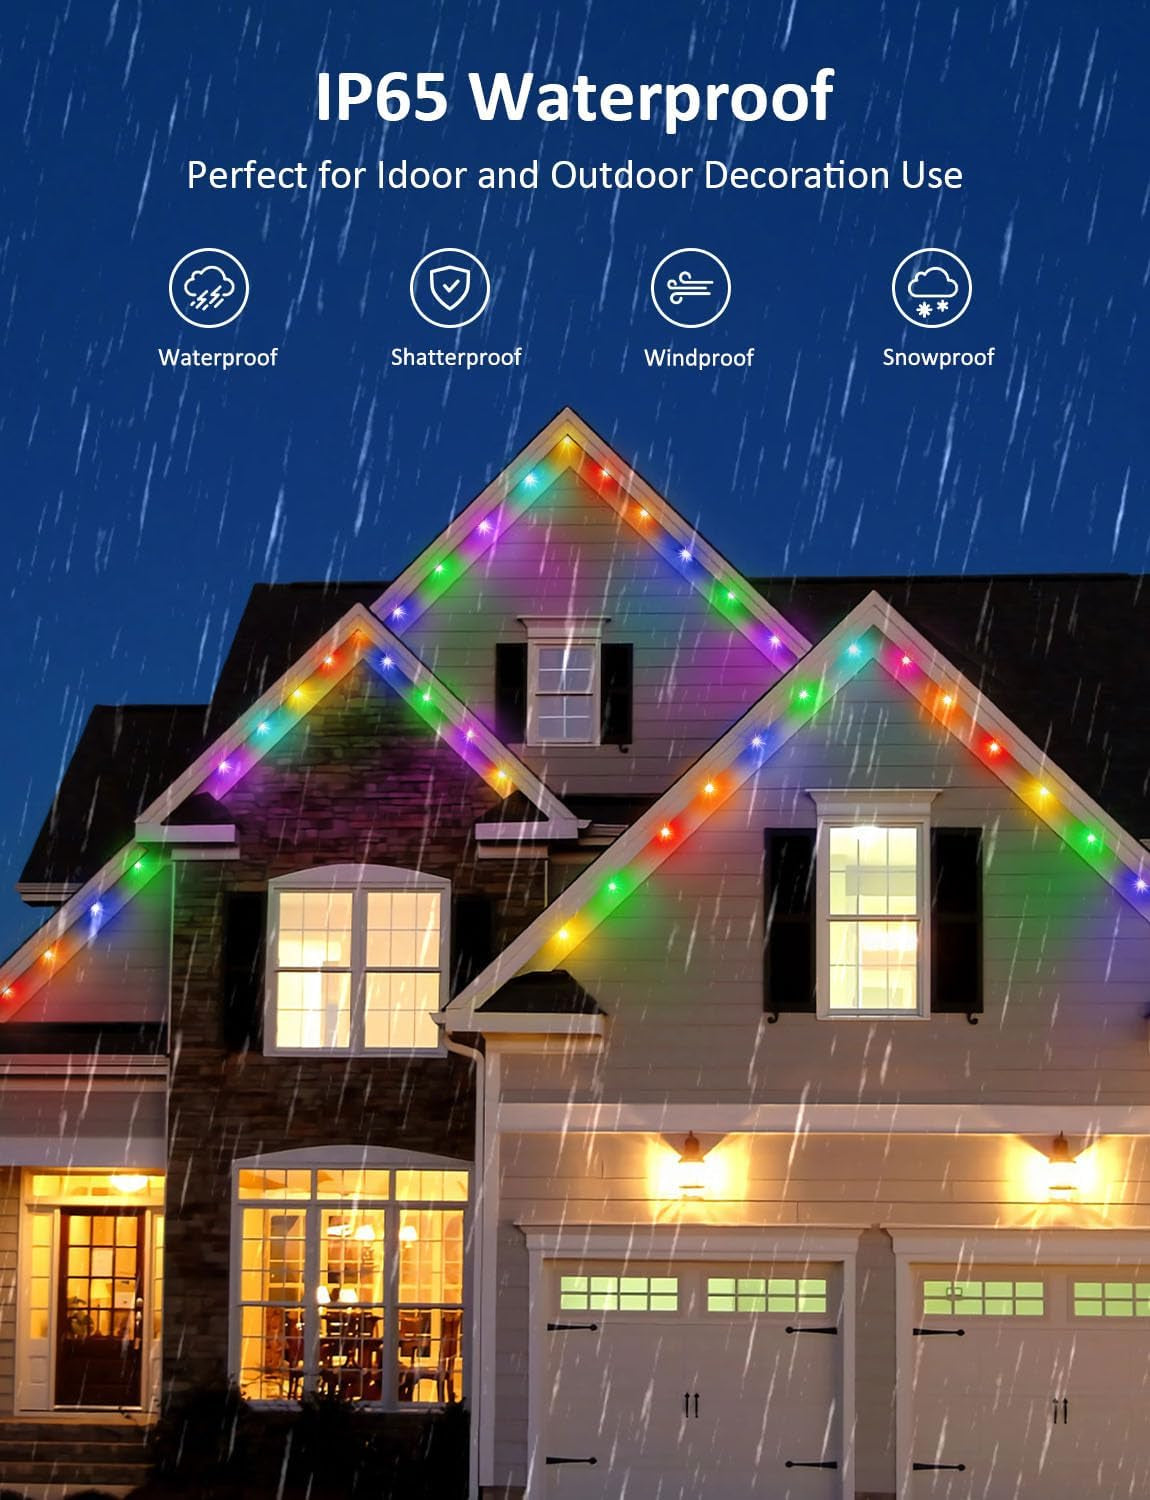 Smart LED Christmas Lights - Smart Twinkly String Lights App Controlled, Dimmable Color Changing Christmas Lights, Xmas Tree Lights Work with Alexa & Google Home for Outdoor Indoor Party Decor